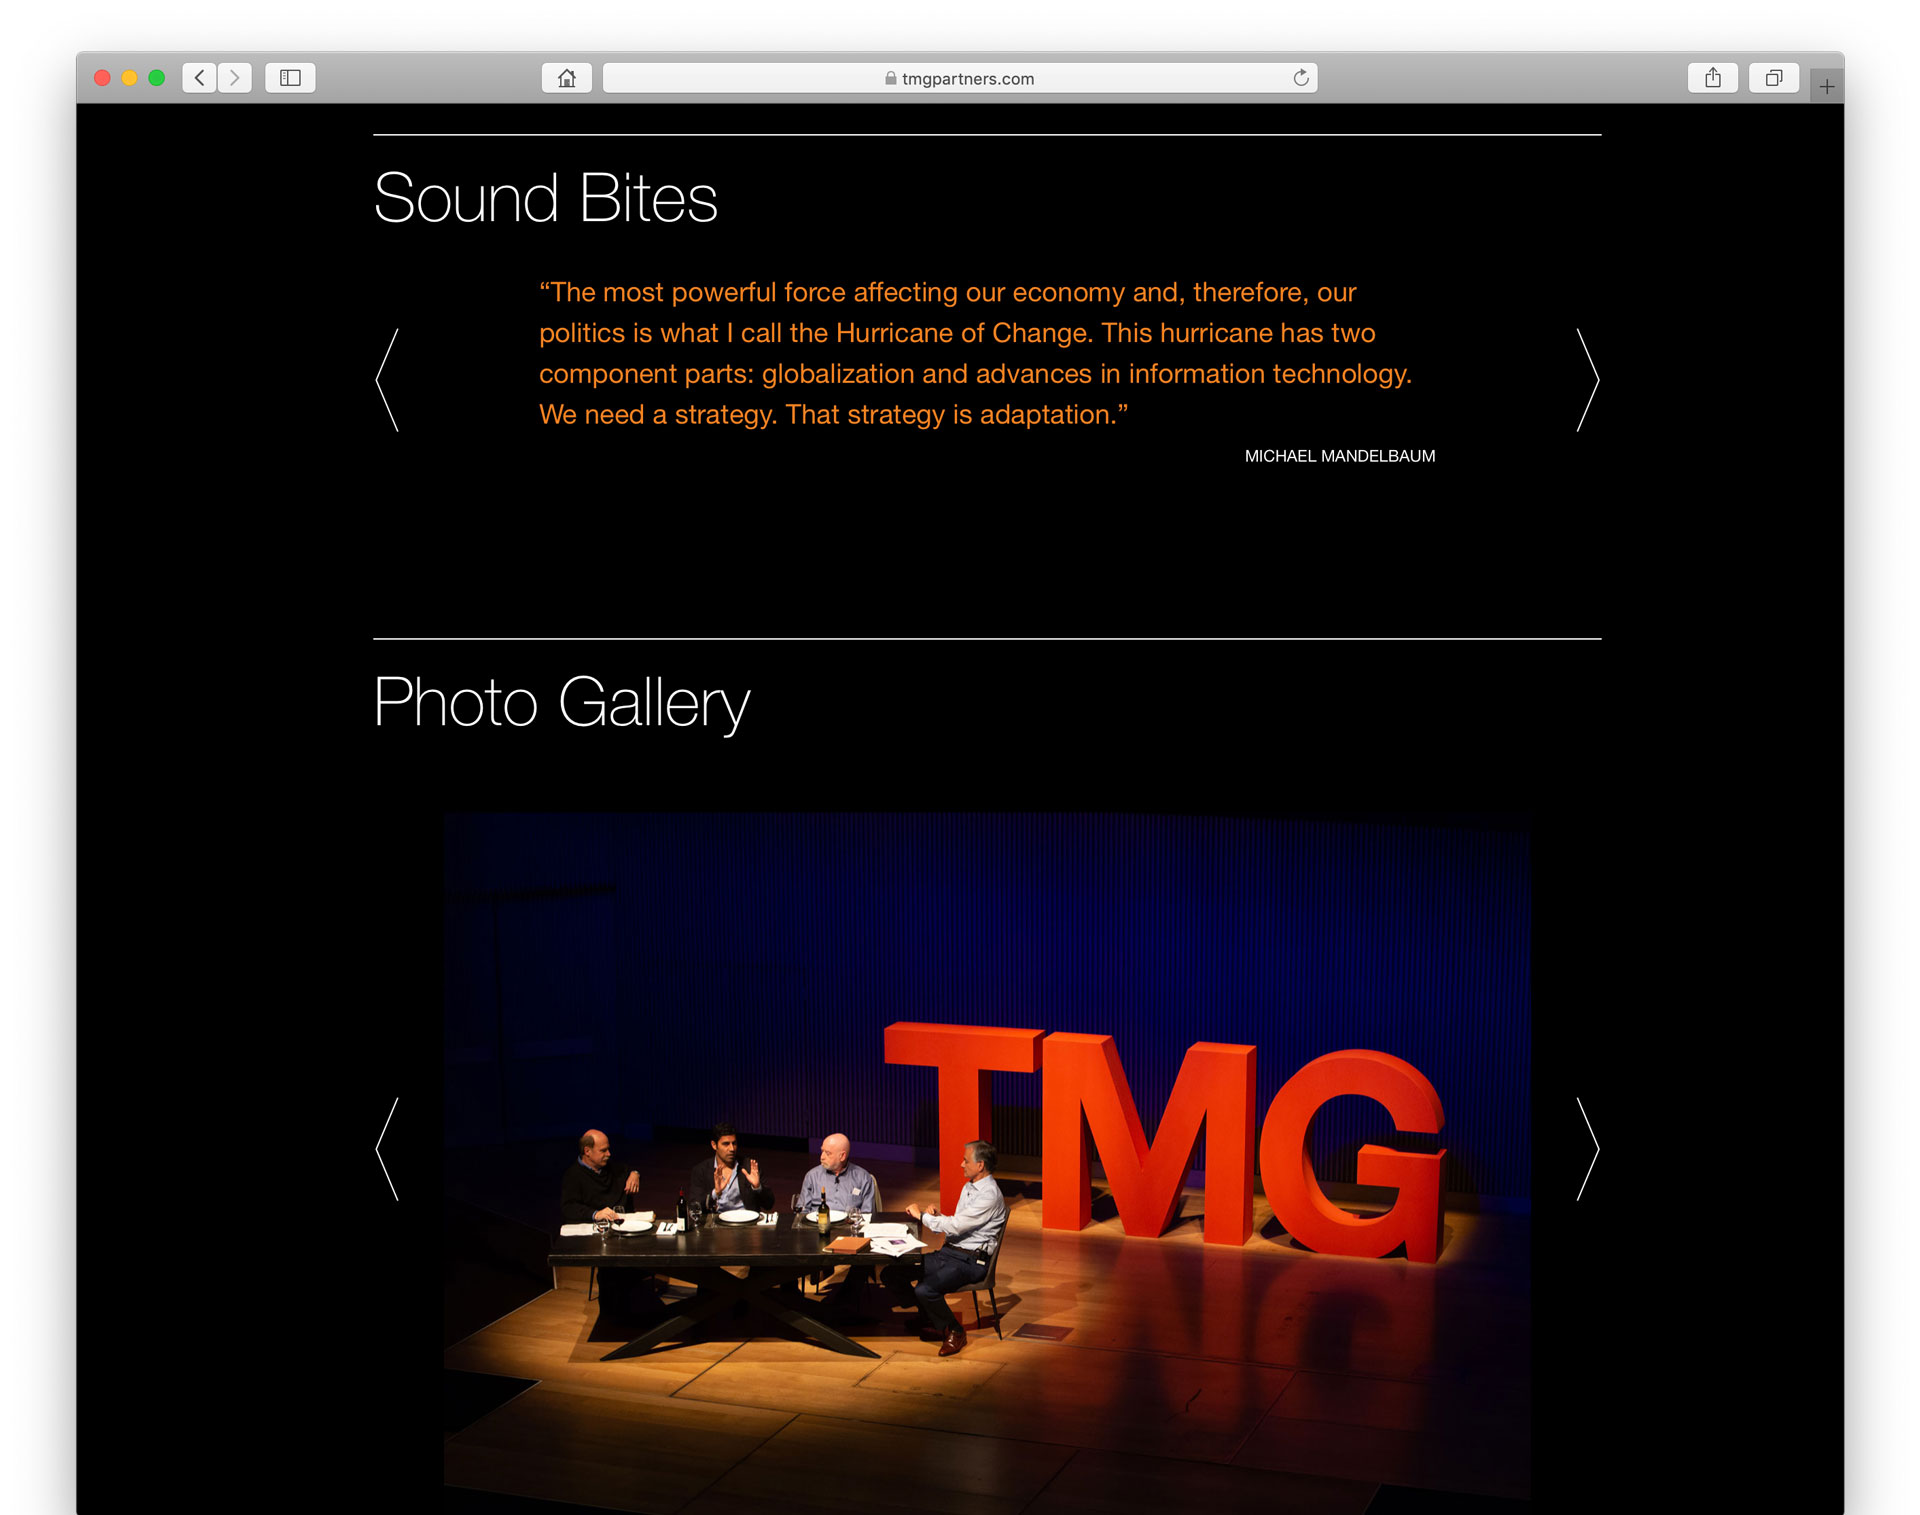 Screenshot of event web page showing sound bites and photo gallery.